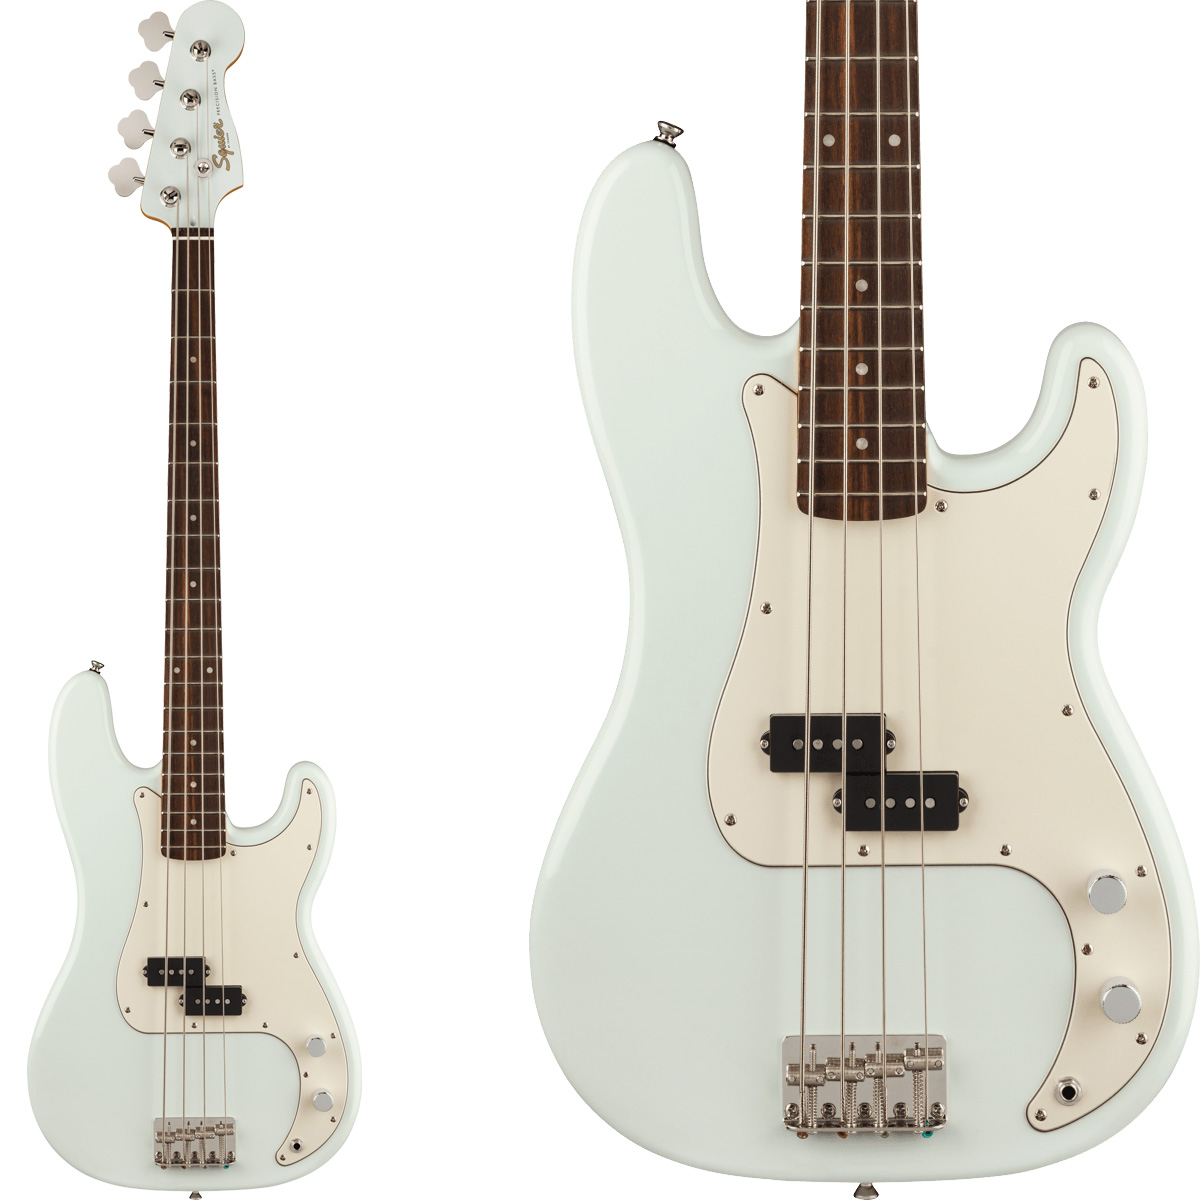 【4474】 Squier by fender precision bass